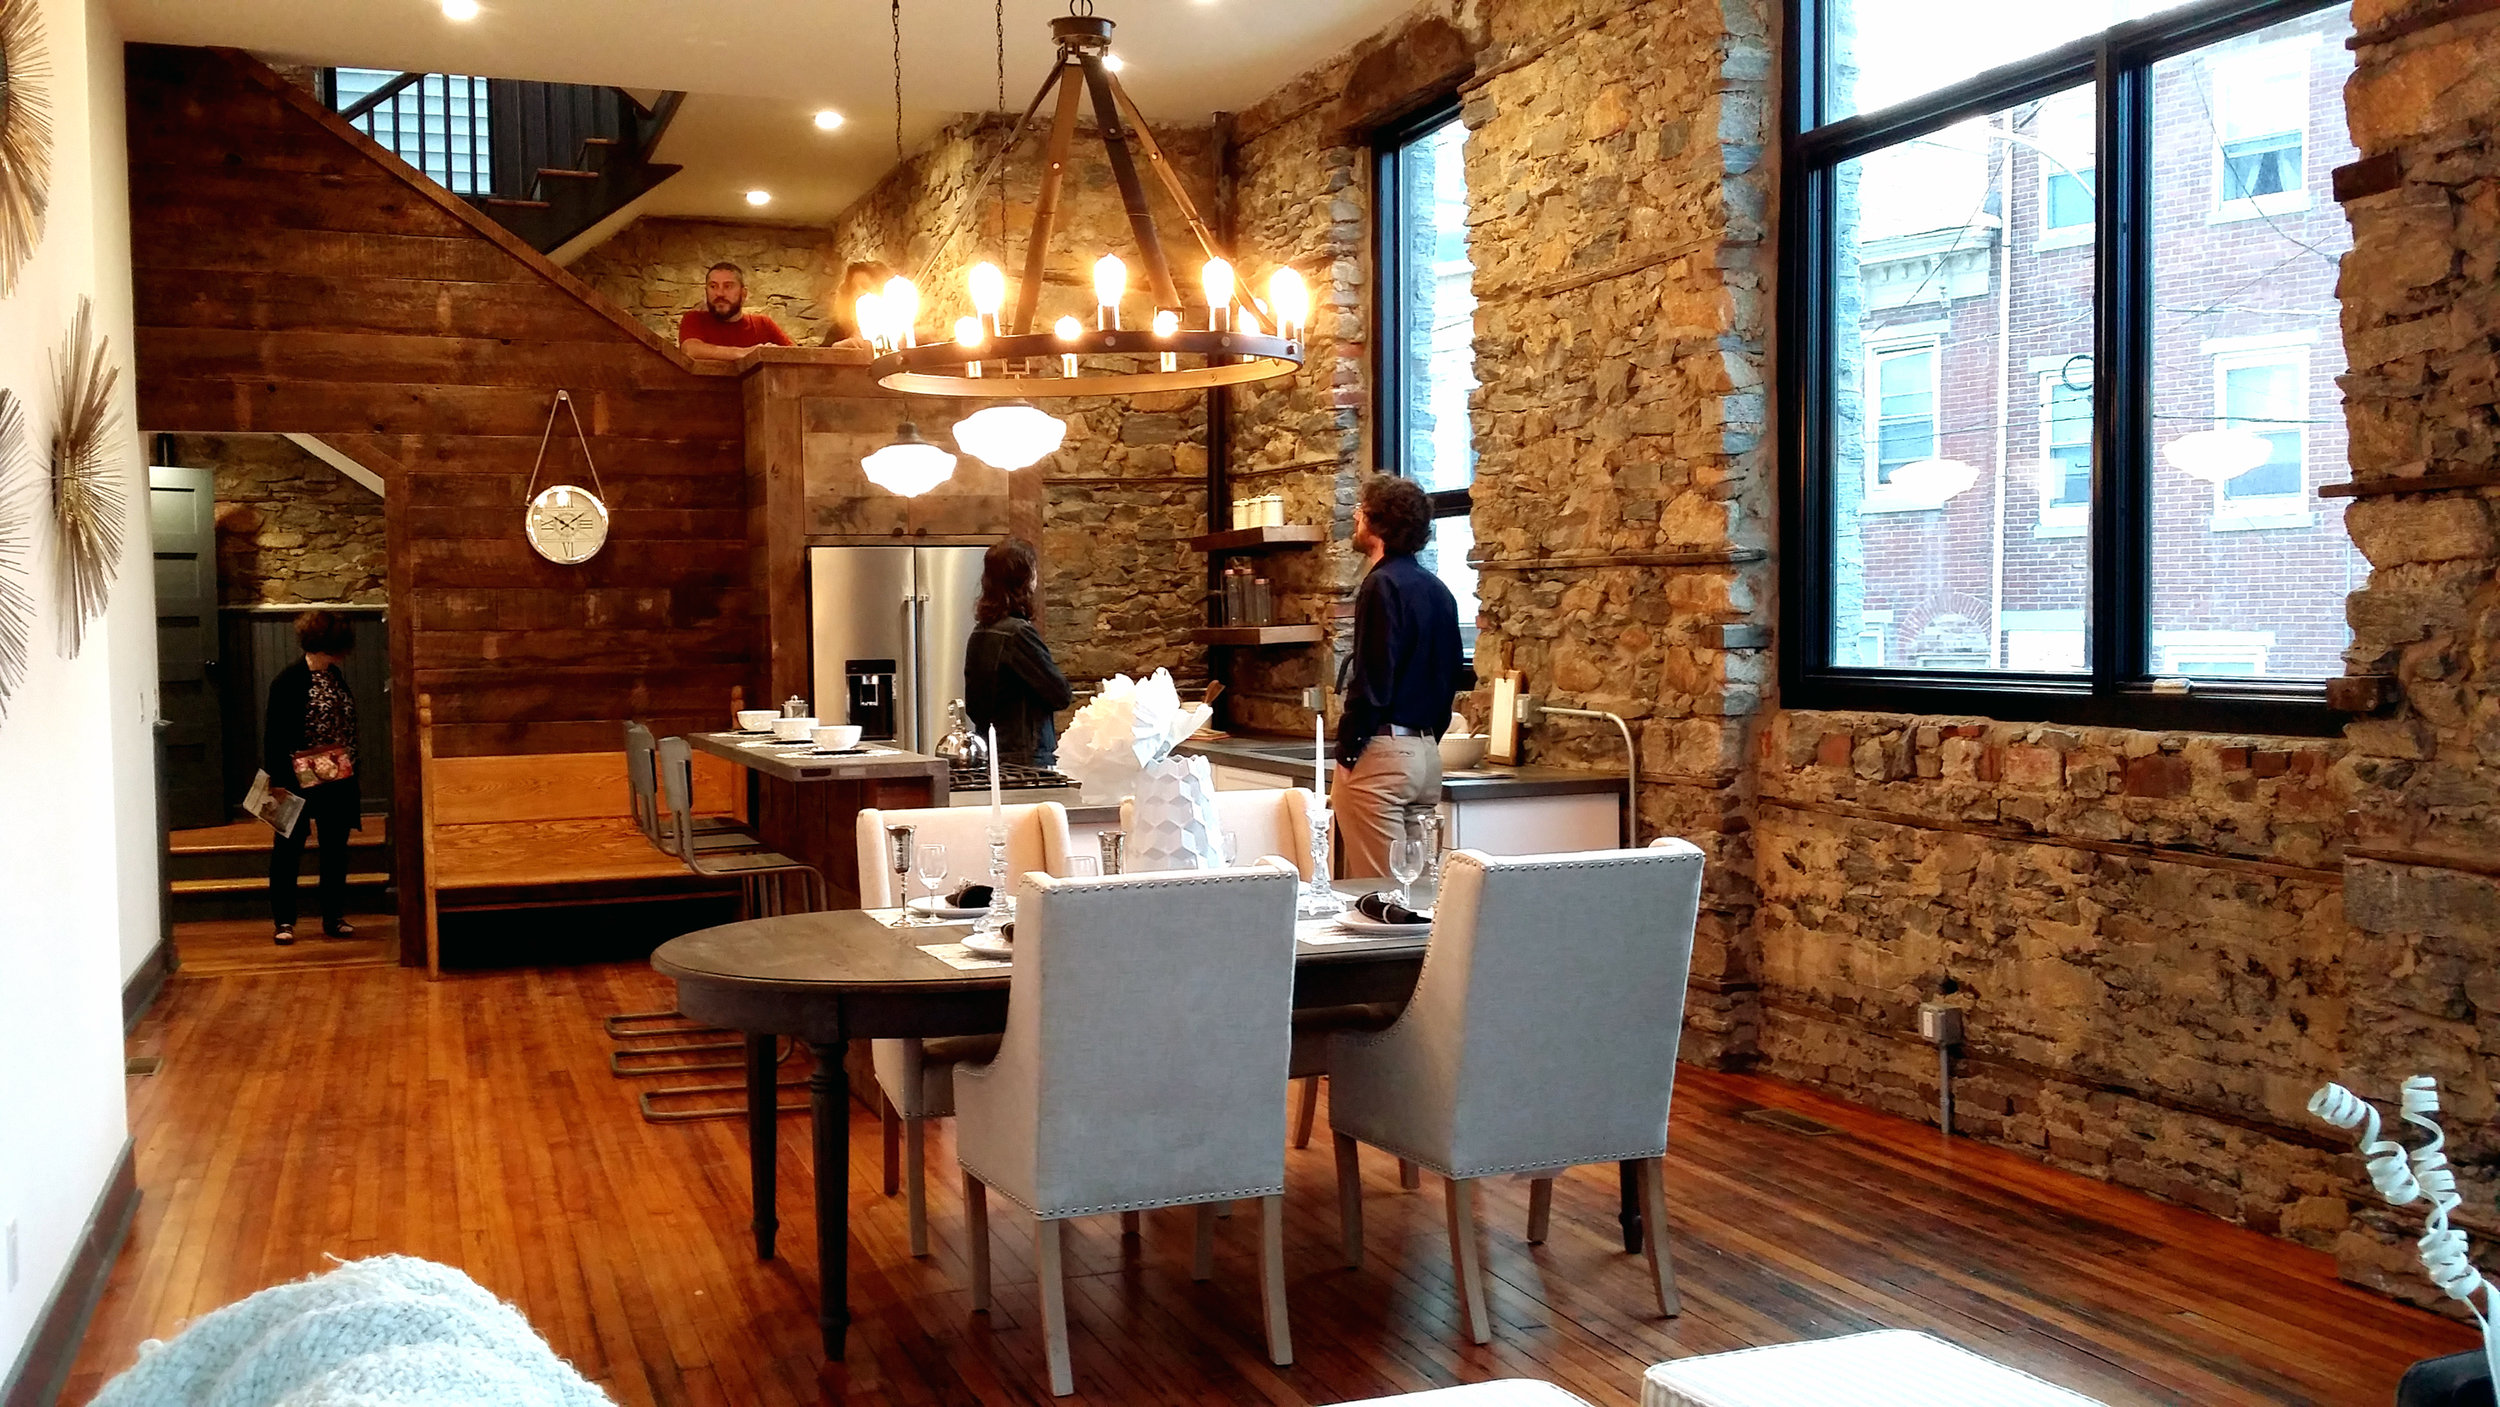 This is the main floor, with kitchen, dining, and living space. The original stone walls are exposed, and the wood floors are original. The wood paneling is salvaged from the original structure.